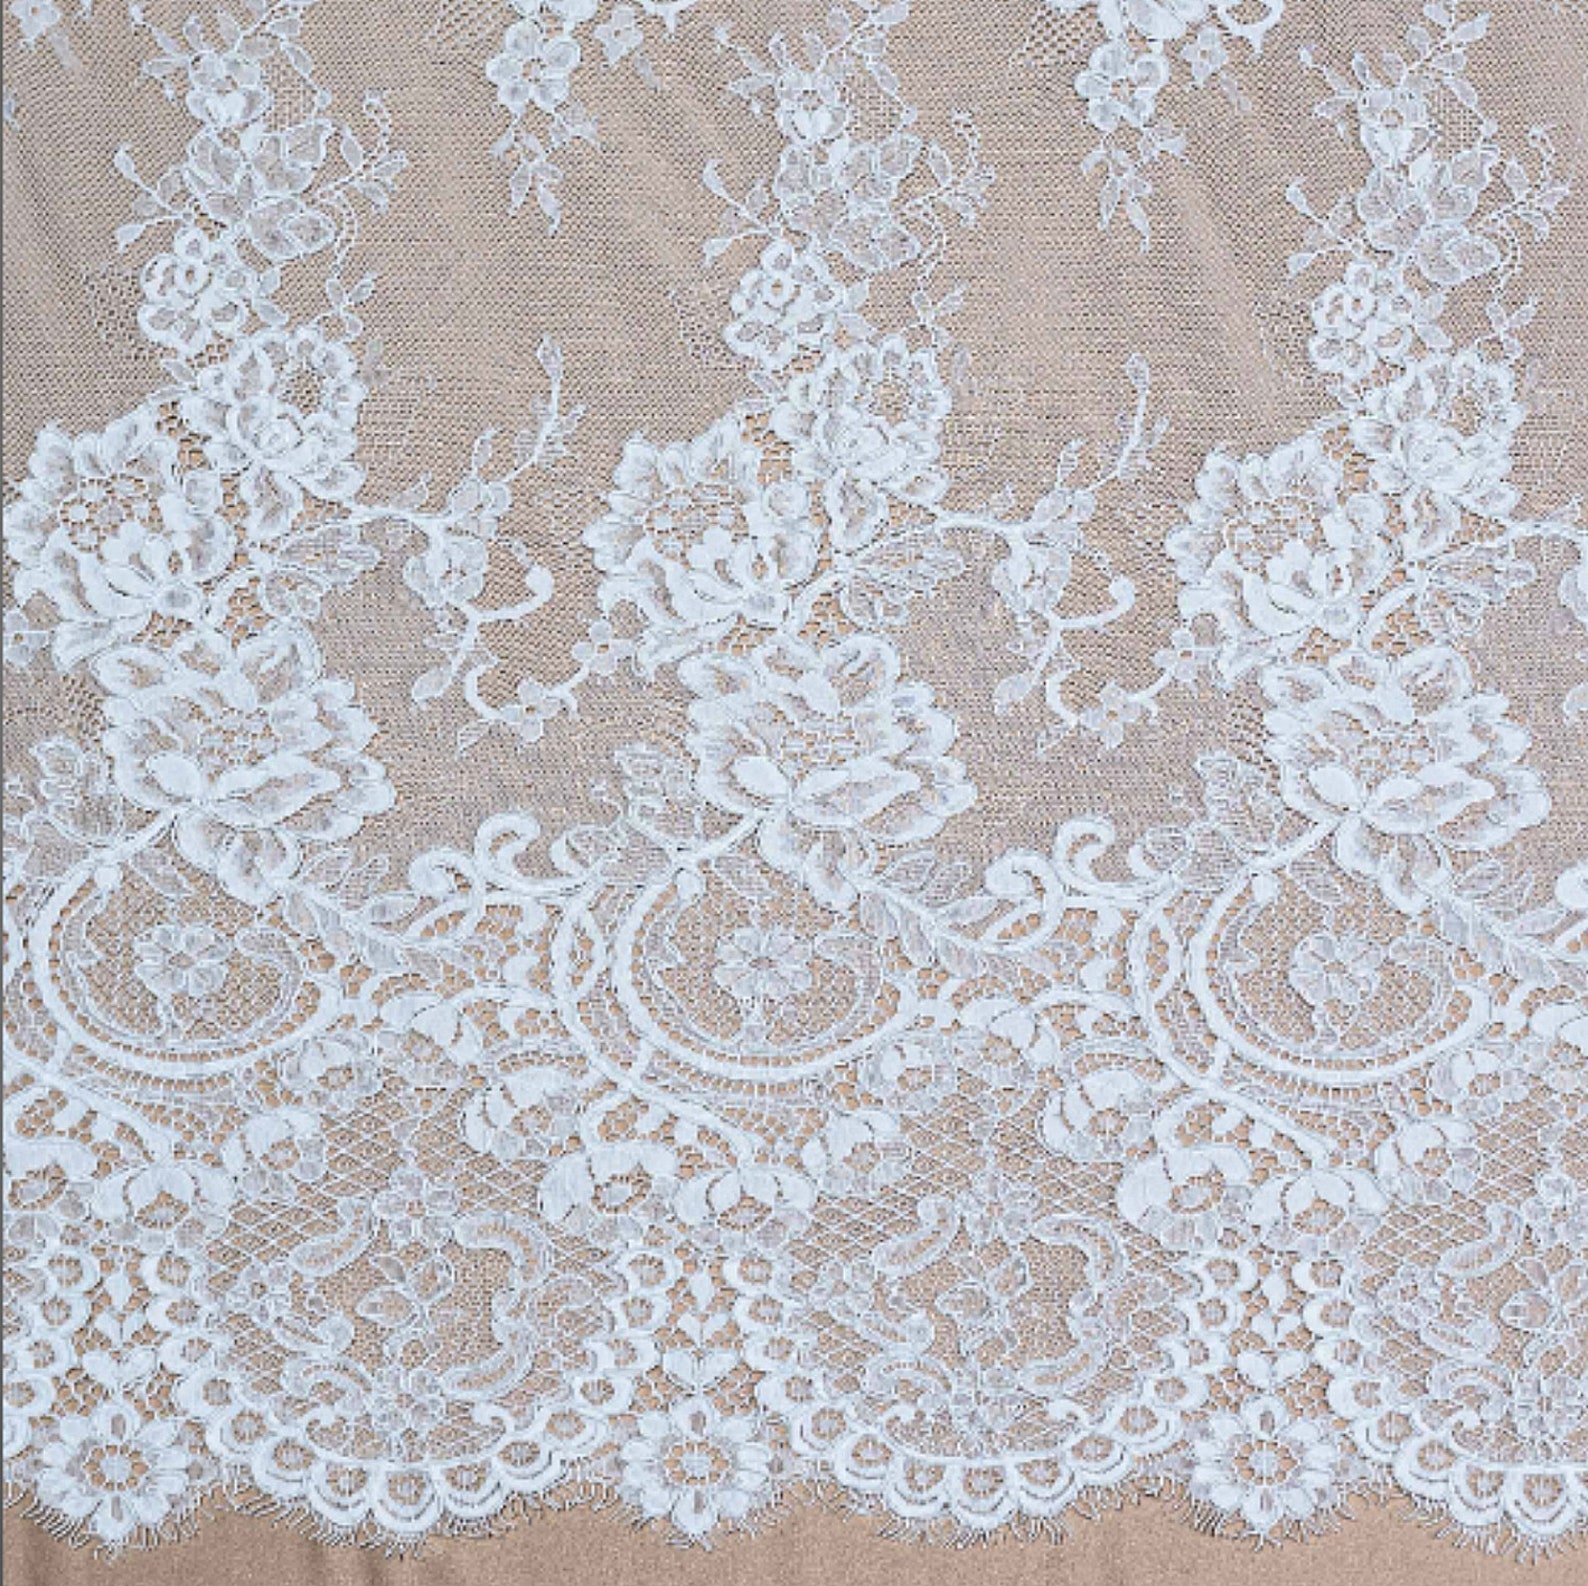 Guipure white bridal flower lace fabric Couture lace fabric | Etsy